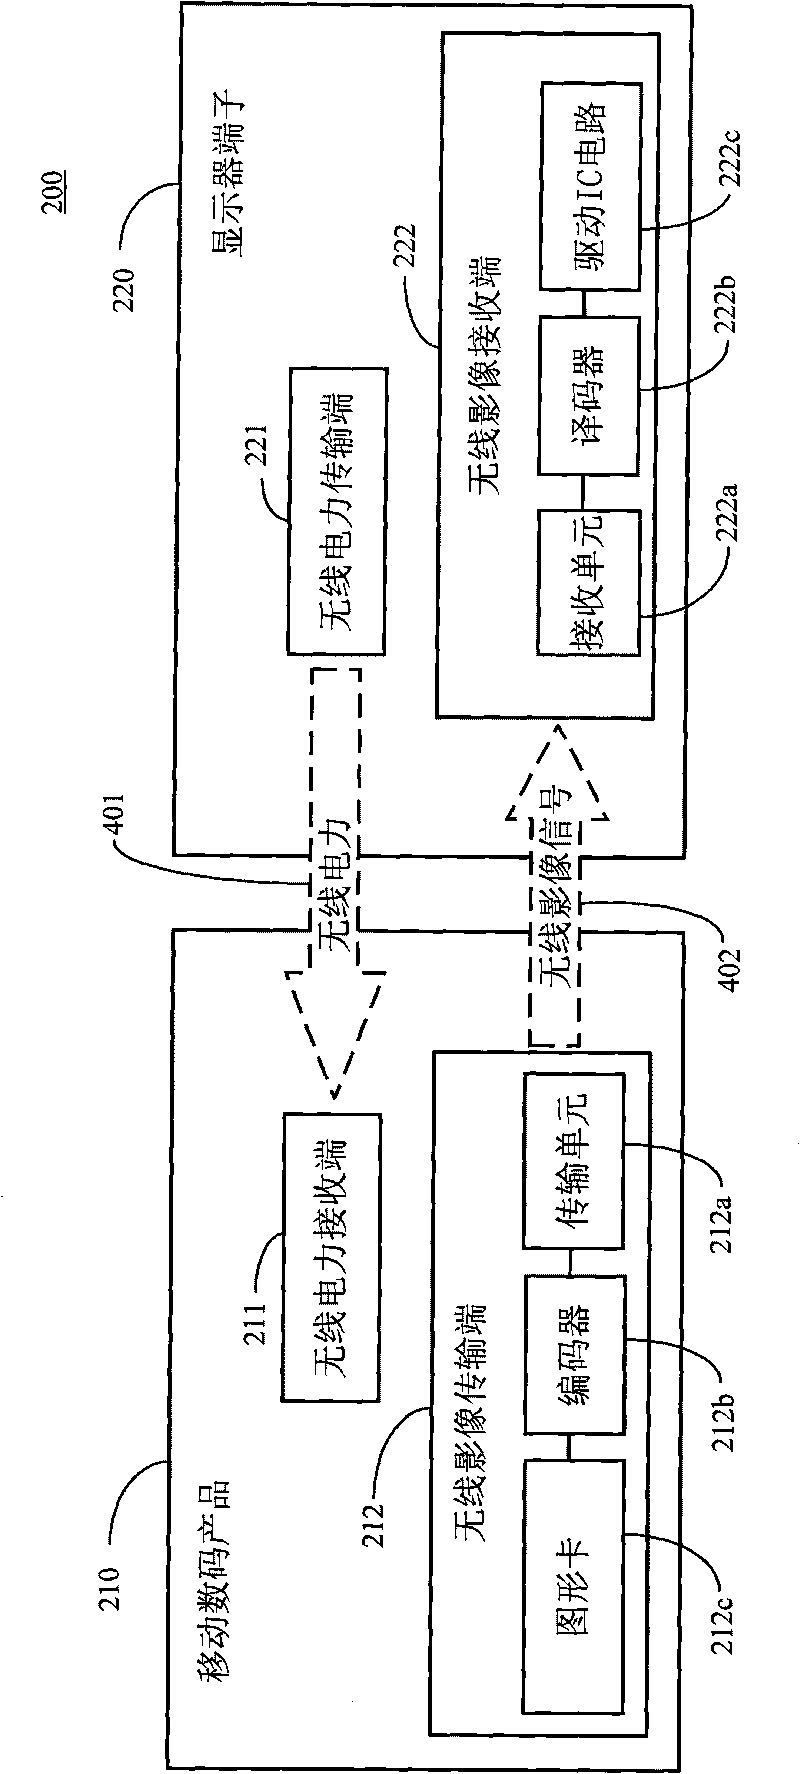 Wireless charging image transfer display system